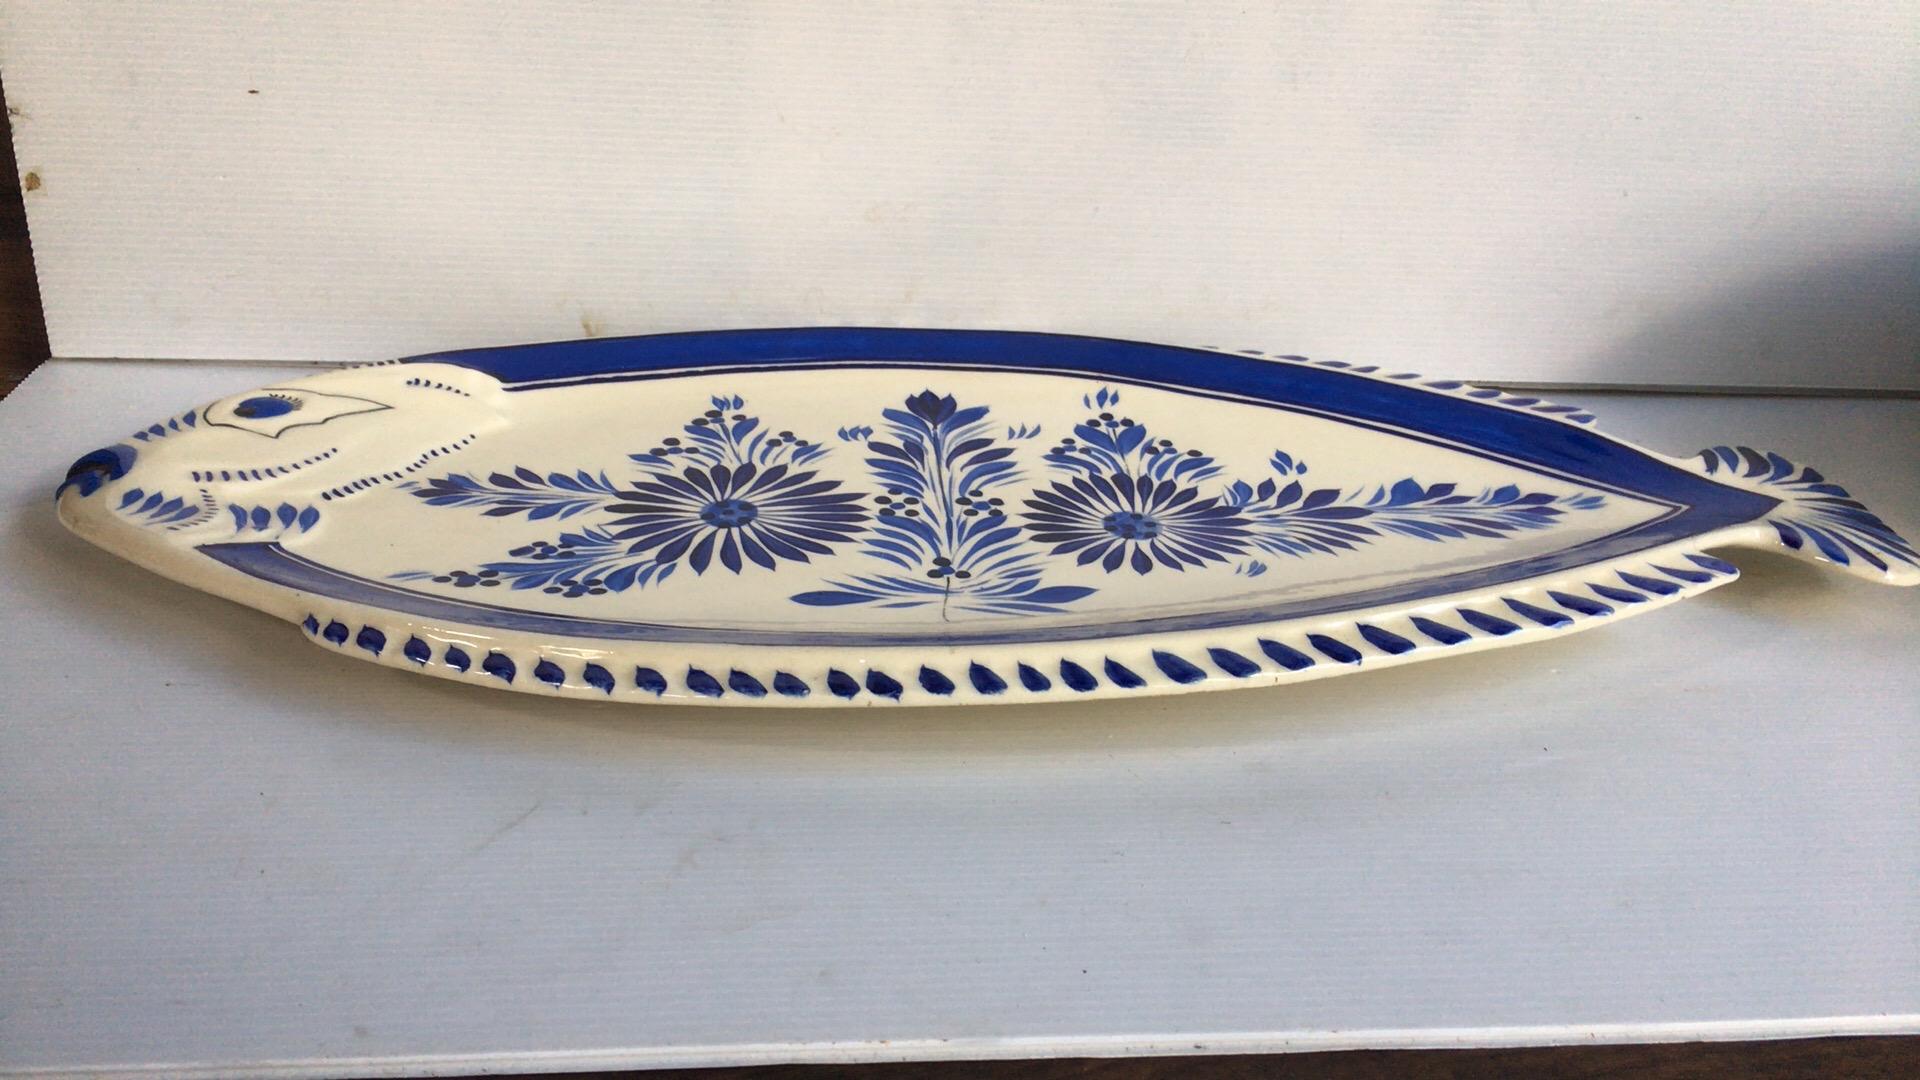 Large blue and white Faience fish platter Quimper, circa 1930.
Measures: Long 23